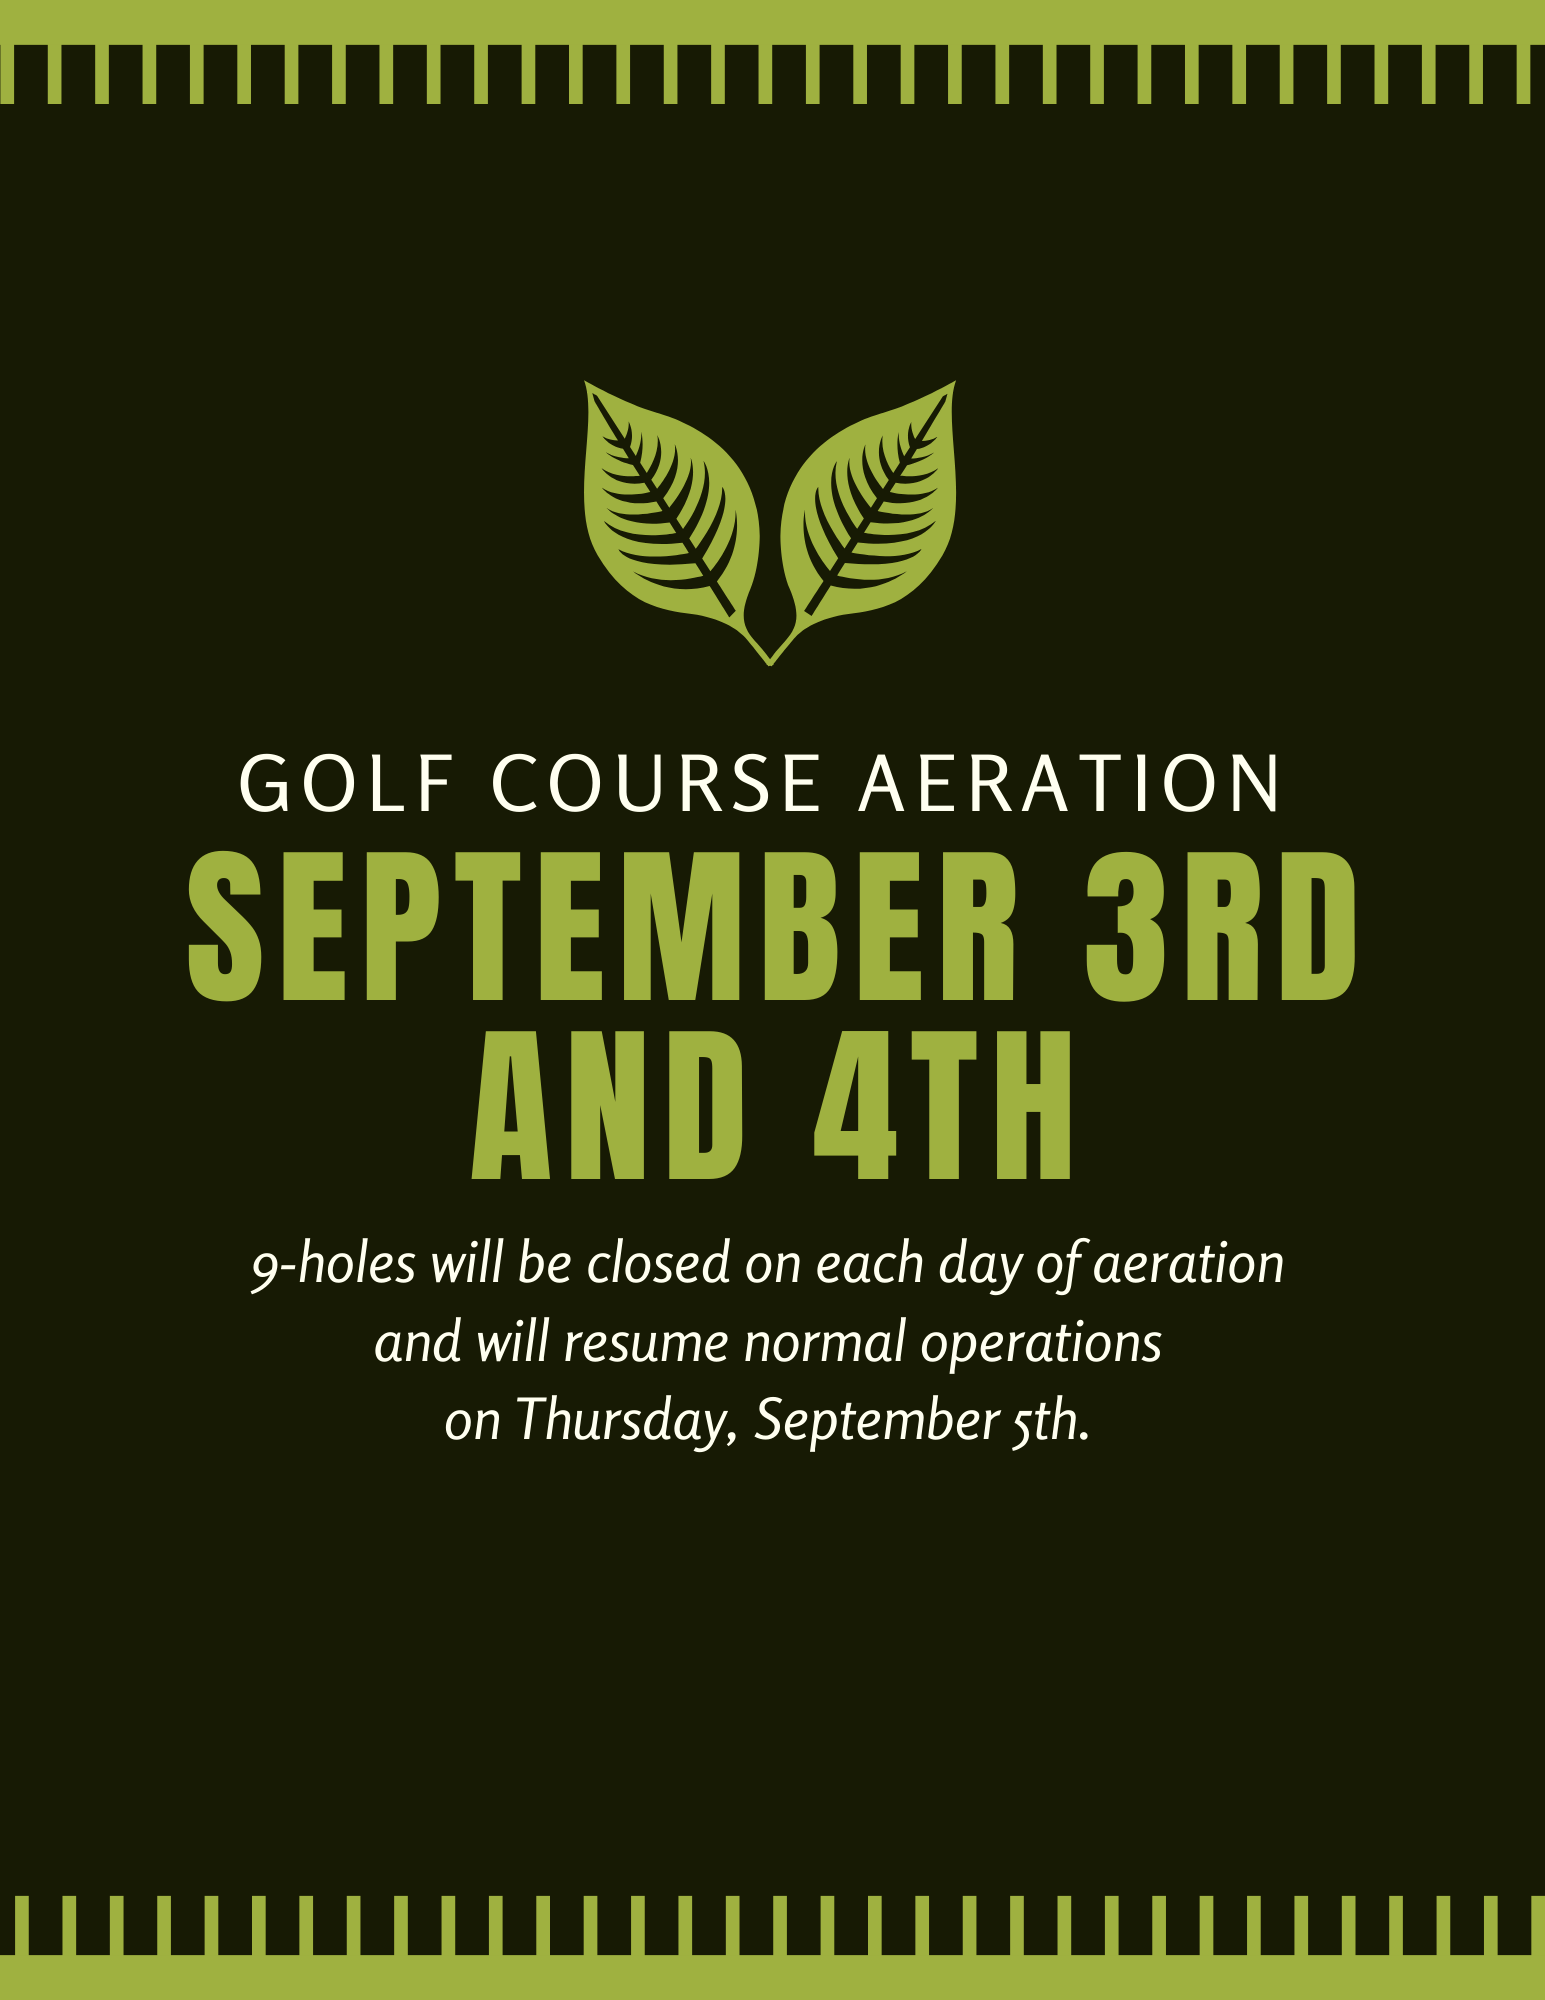 Aeration September 3rd and 4th